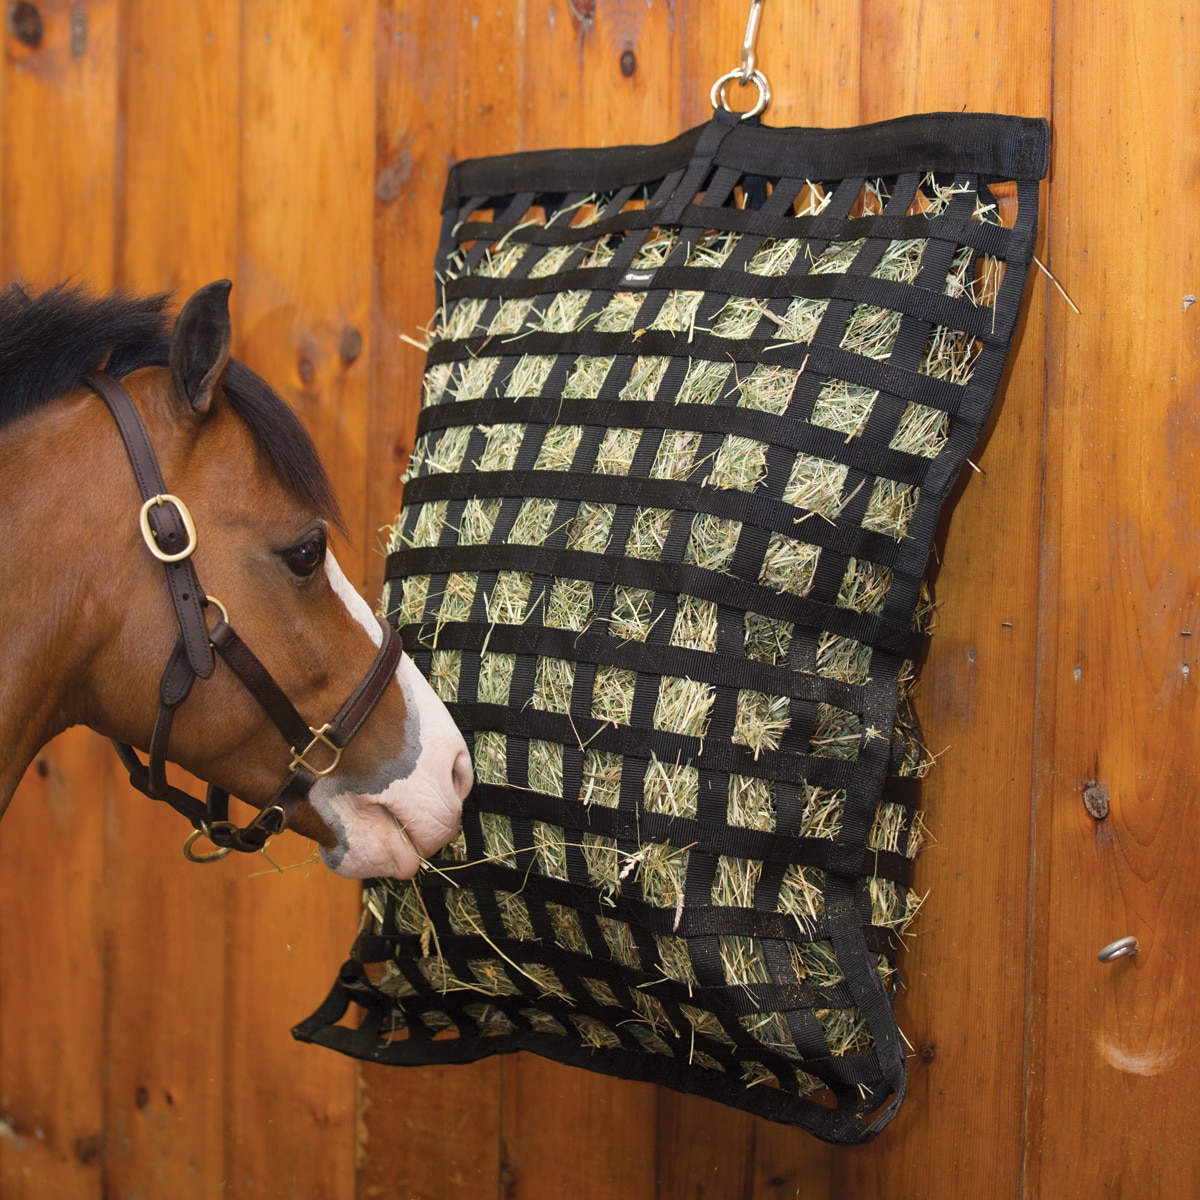 Slow Feed Hay Net Bag Full Day Horse Feeding Large Feeder Bag with Small Holes 